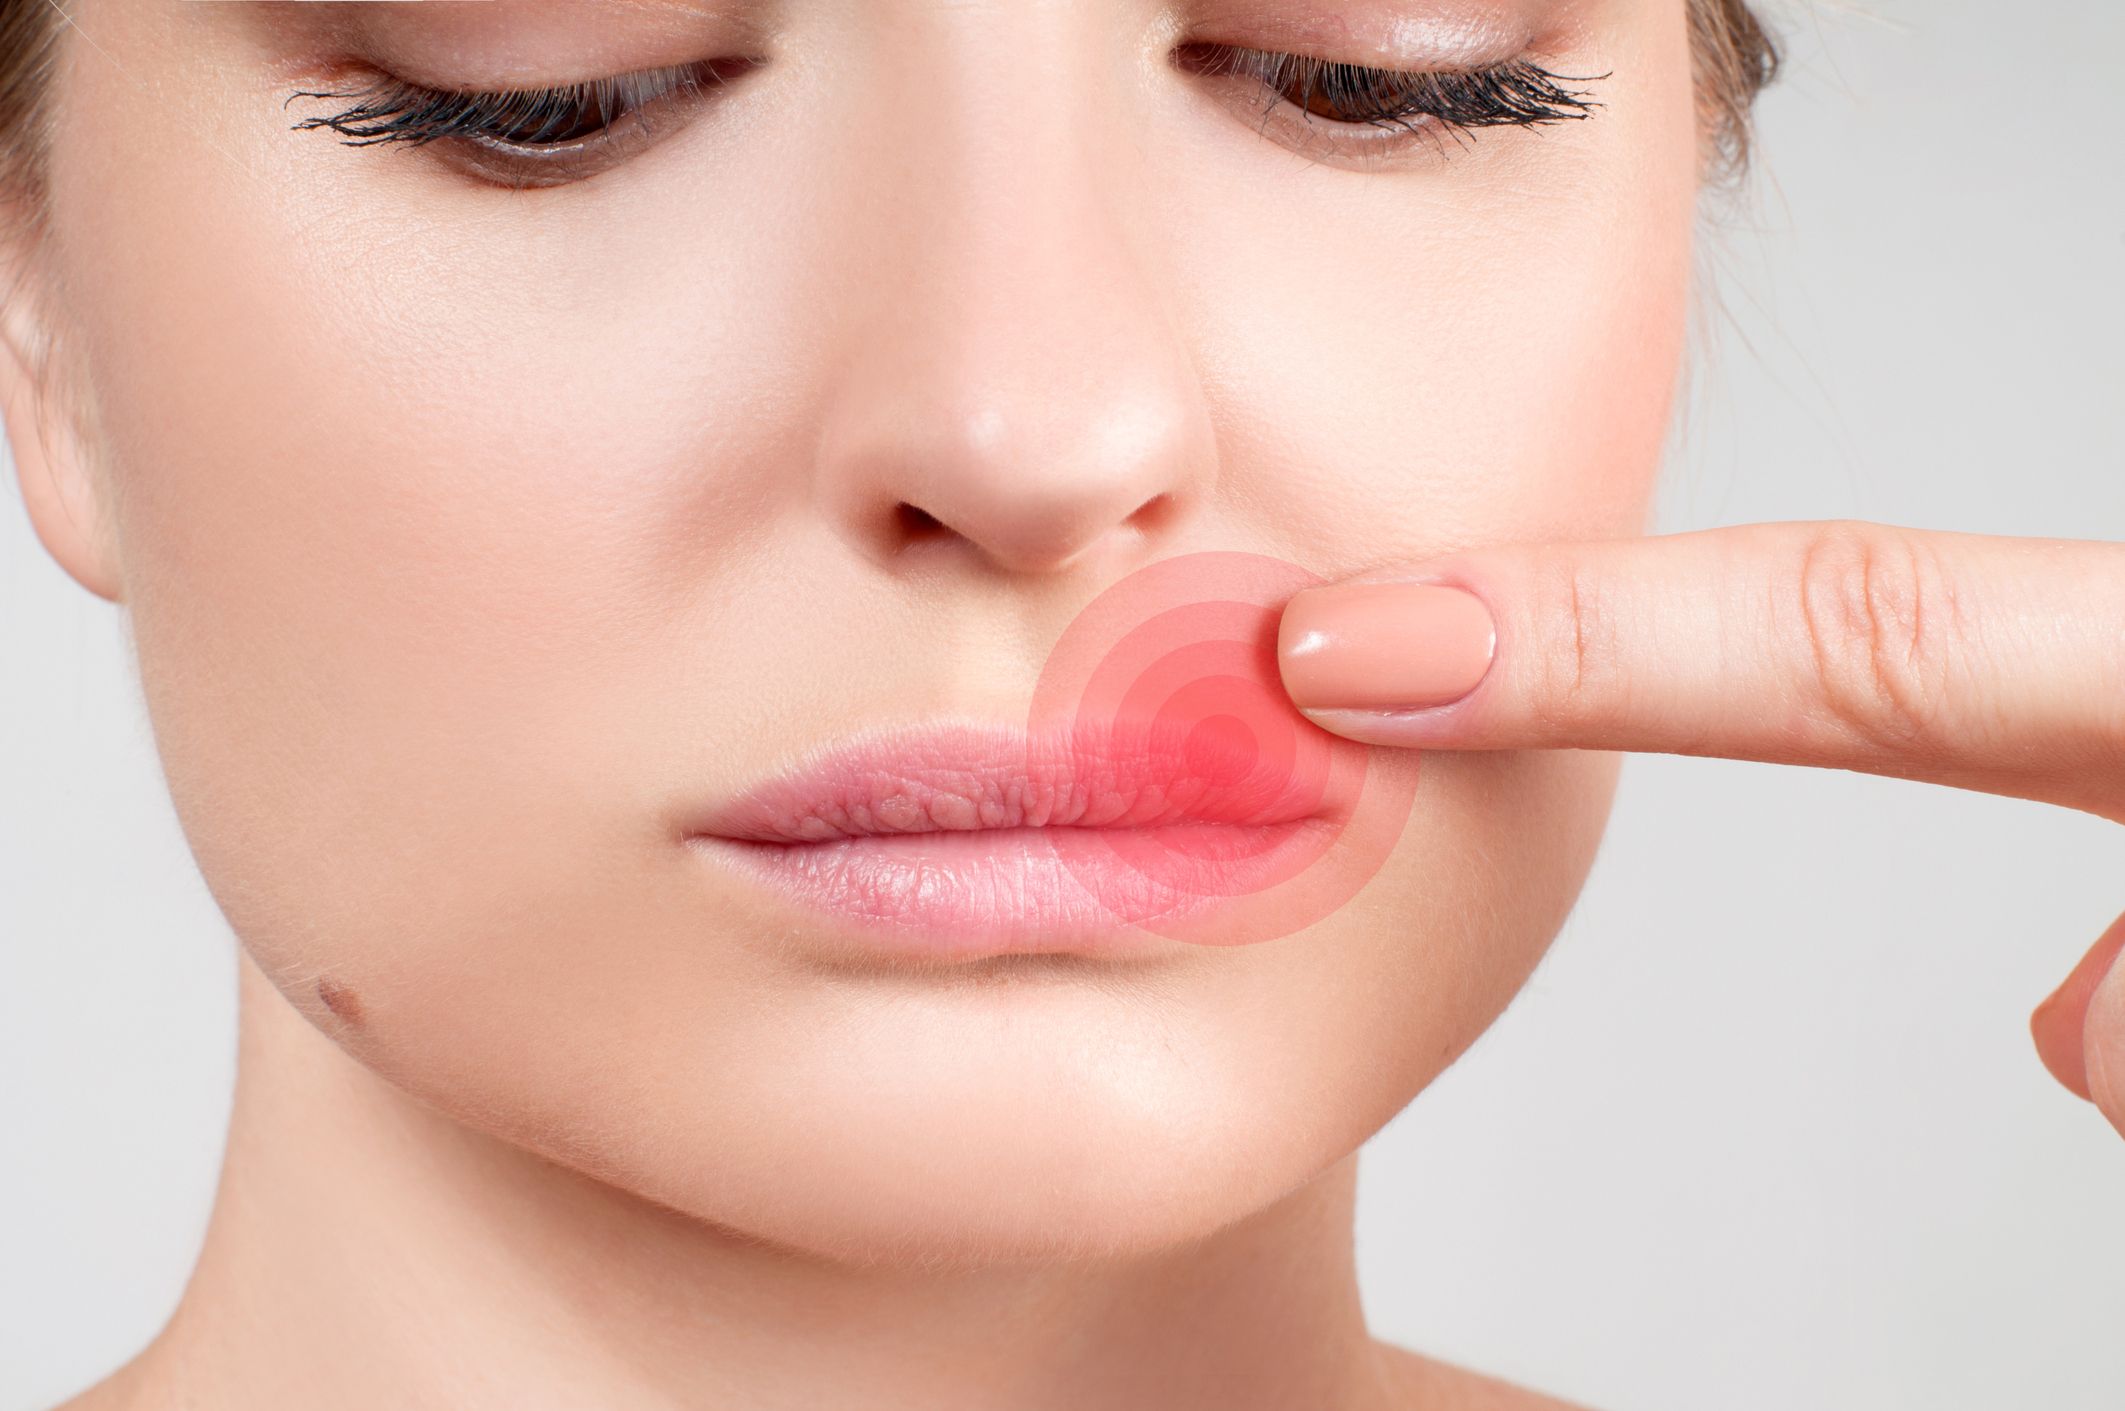 how to tell the difference between chapped lips and herpes